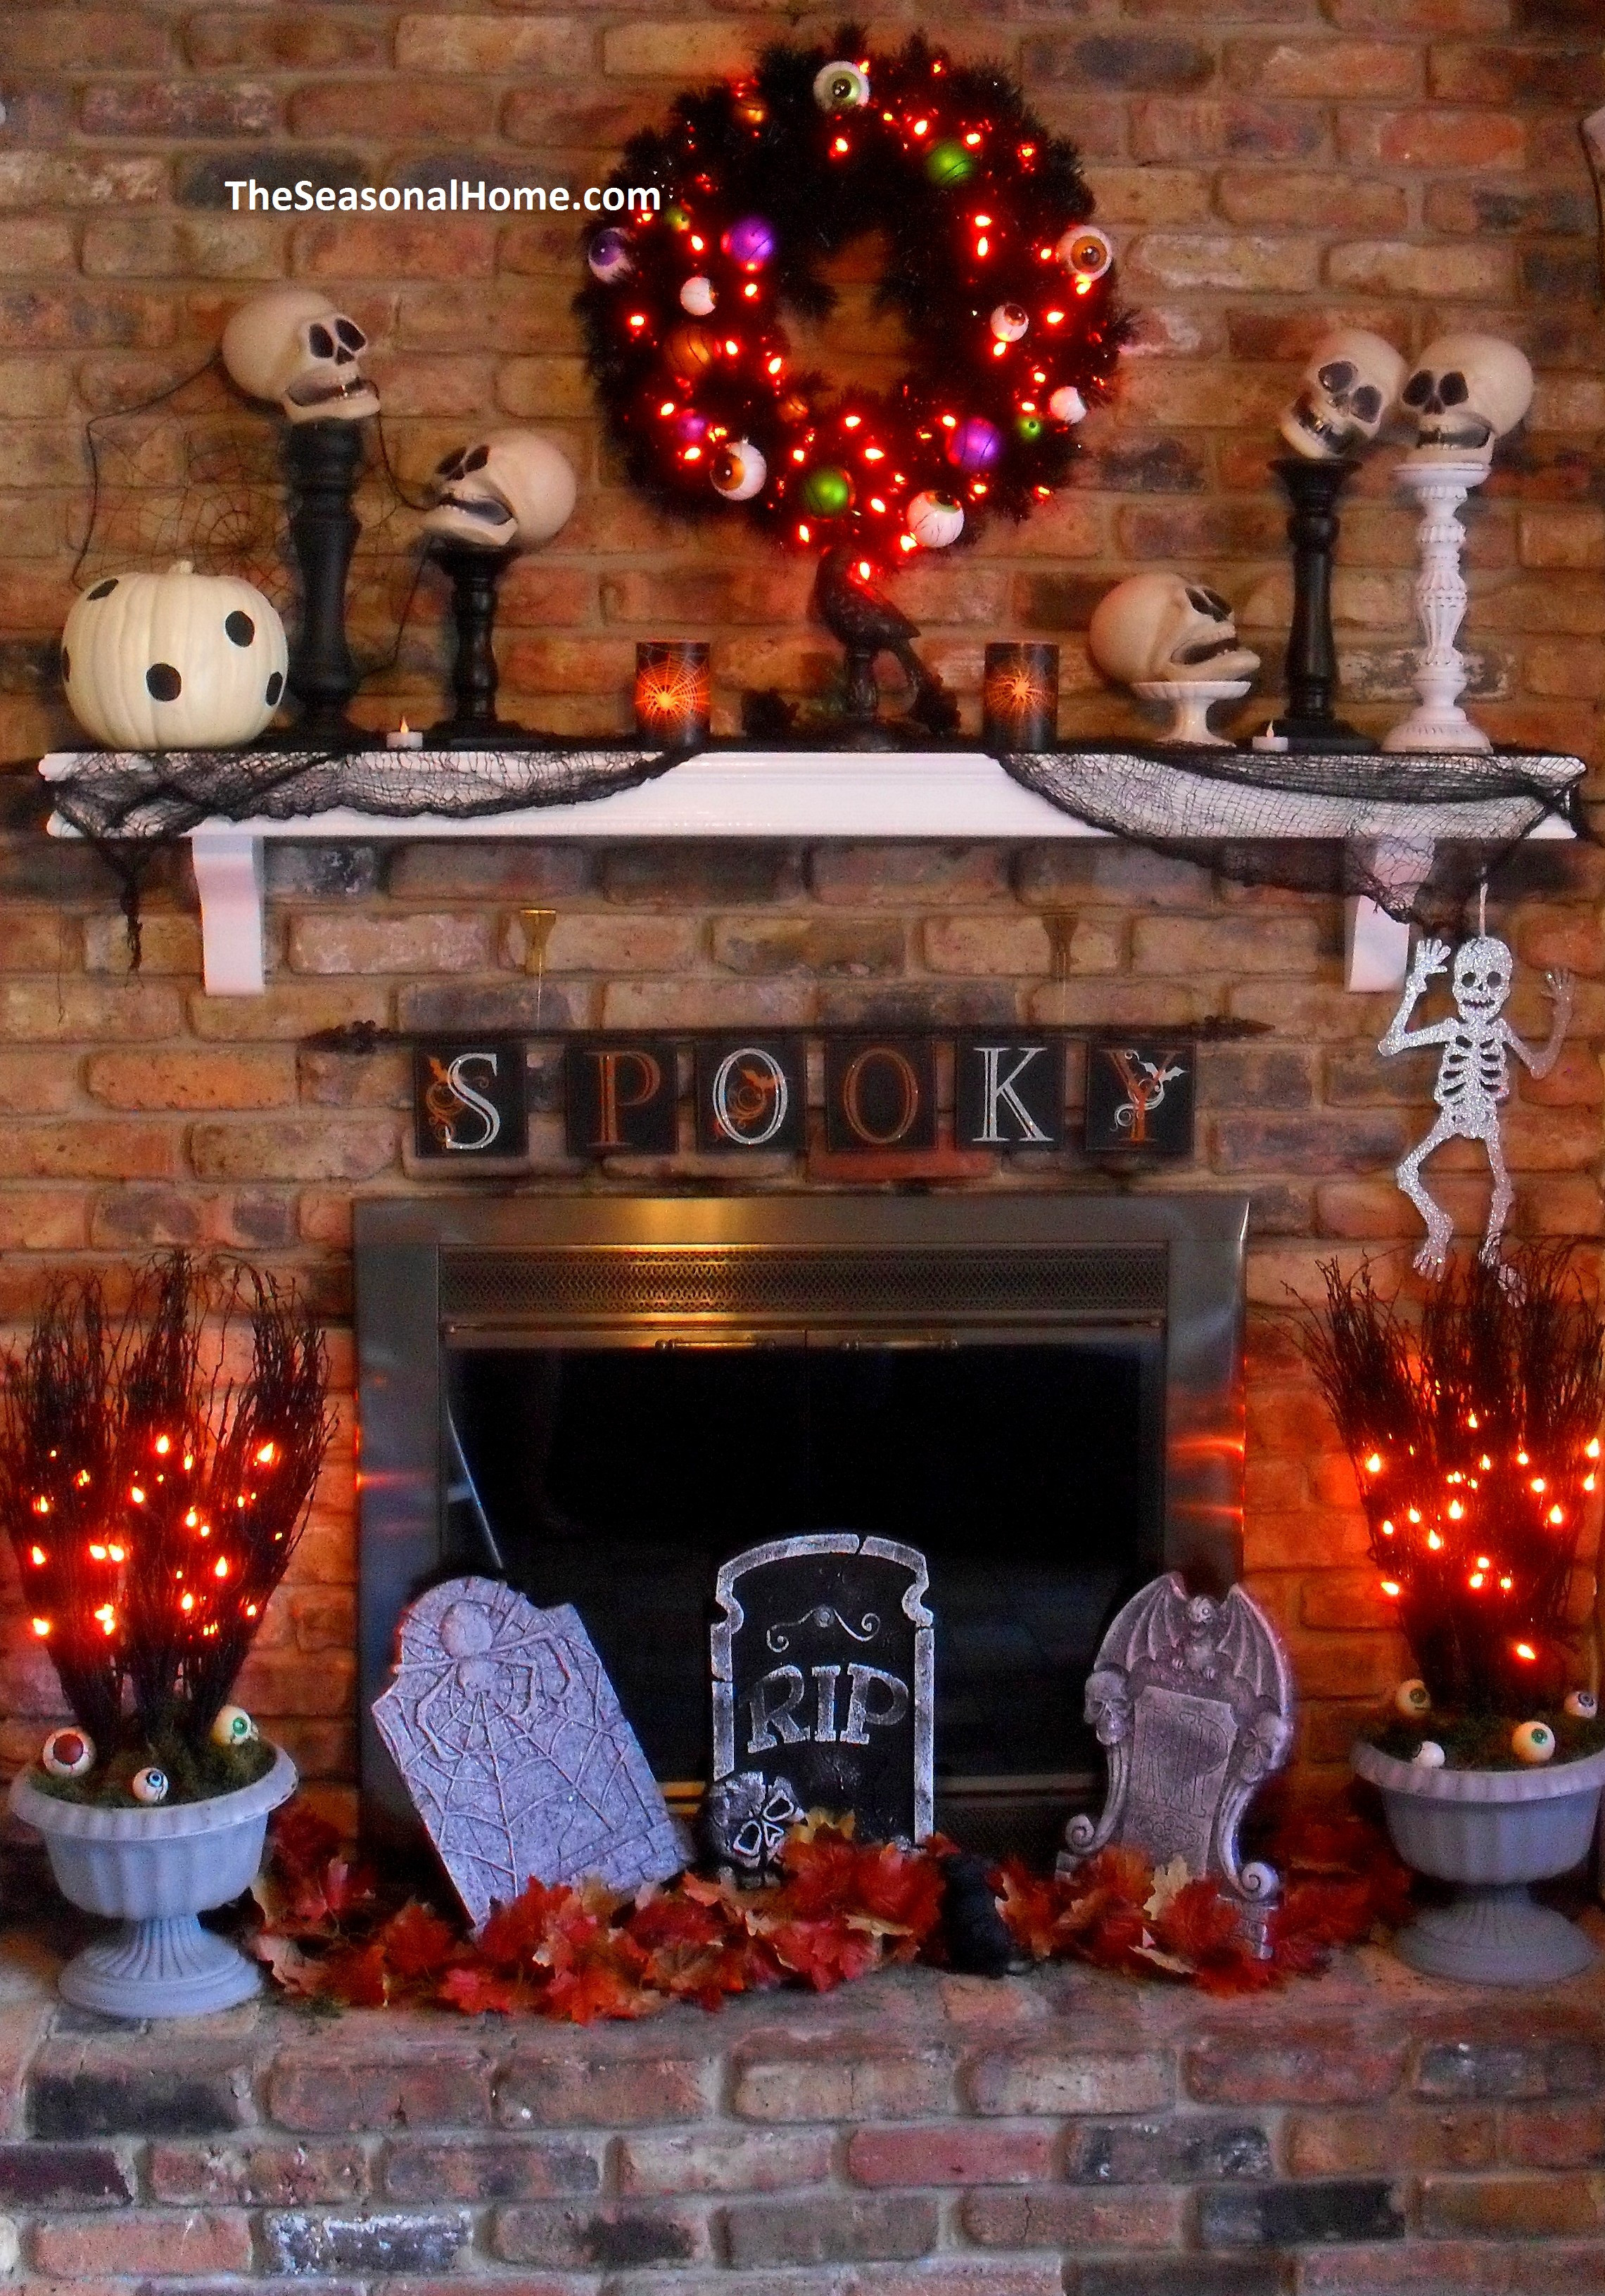 Halloween Fireplace Decorations
 A Thrifty Decorating Theme for Halloween The Seasonal Home